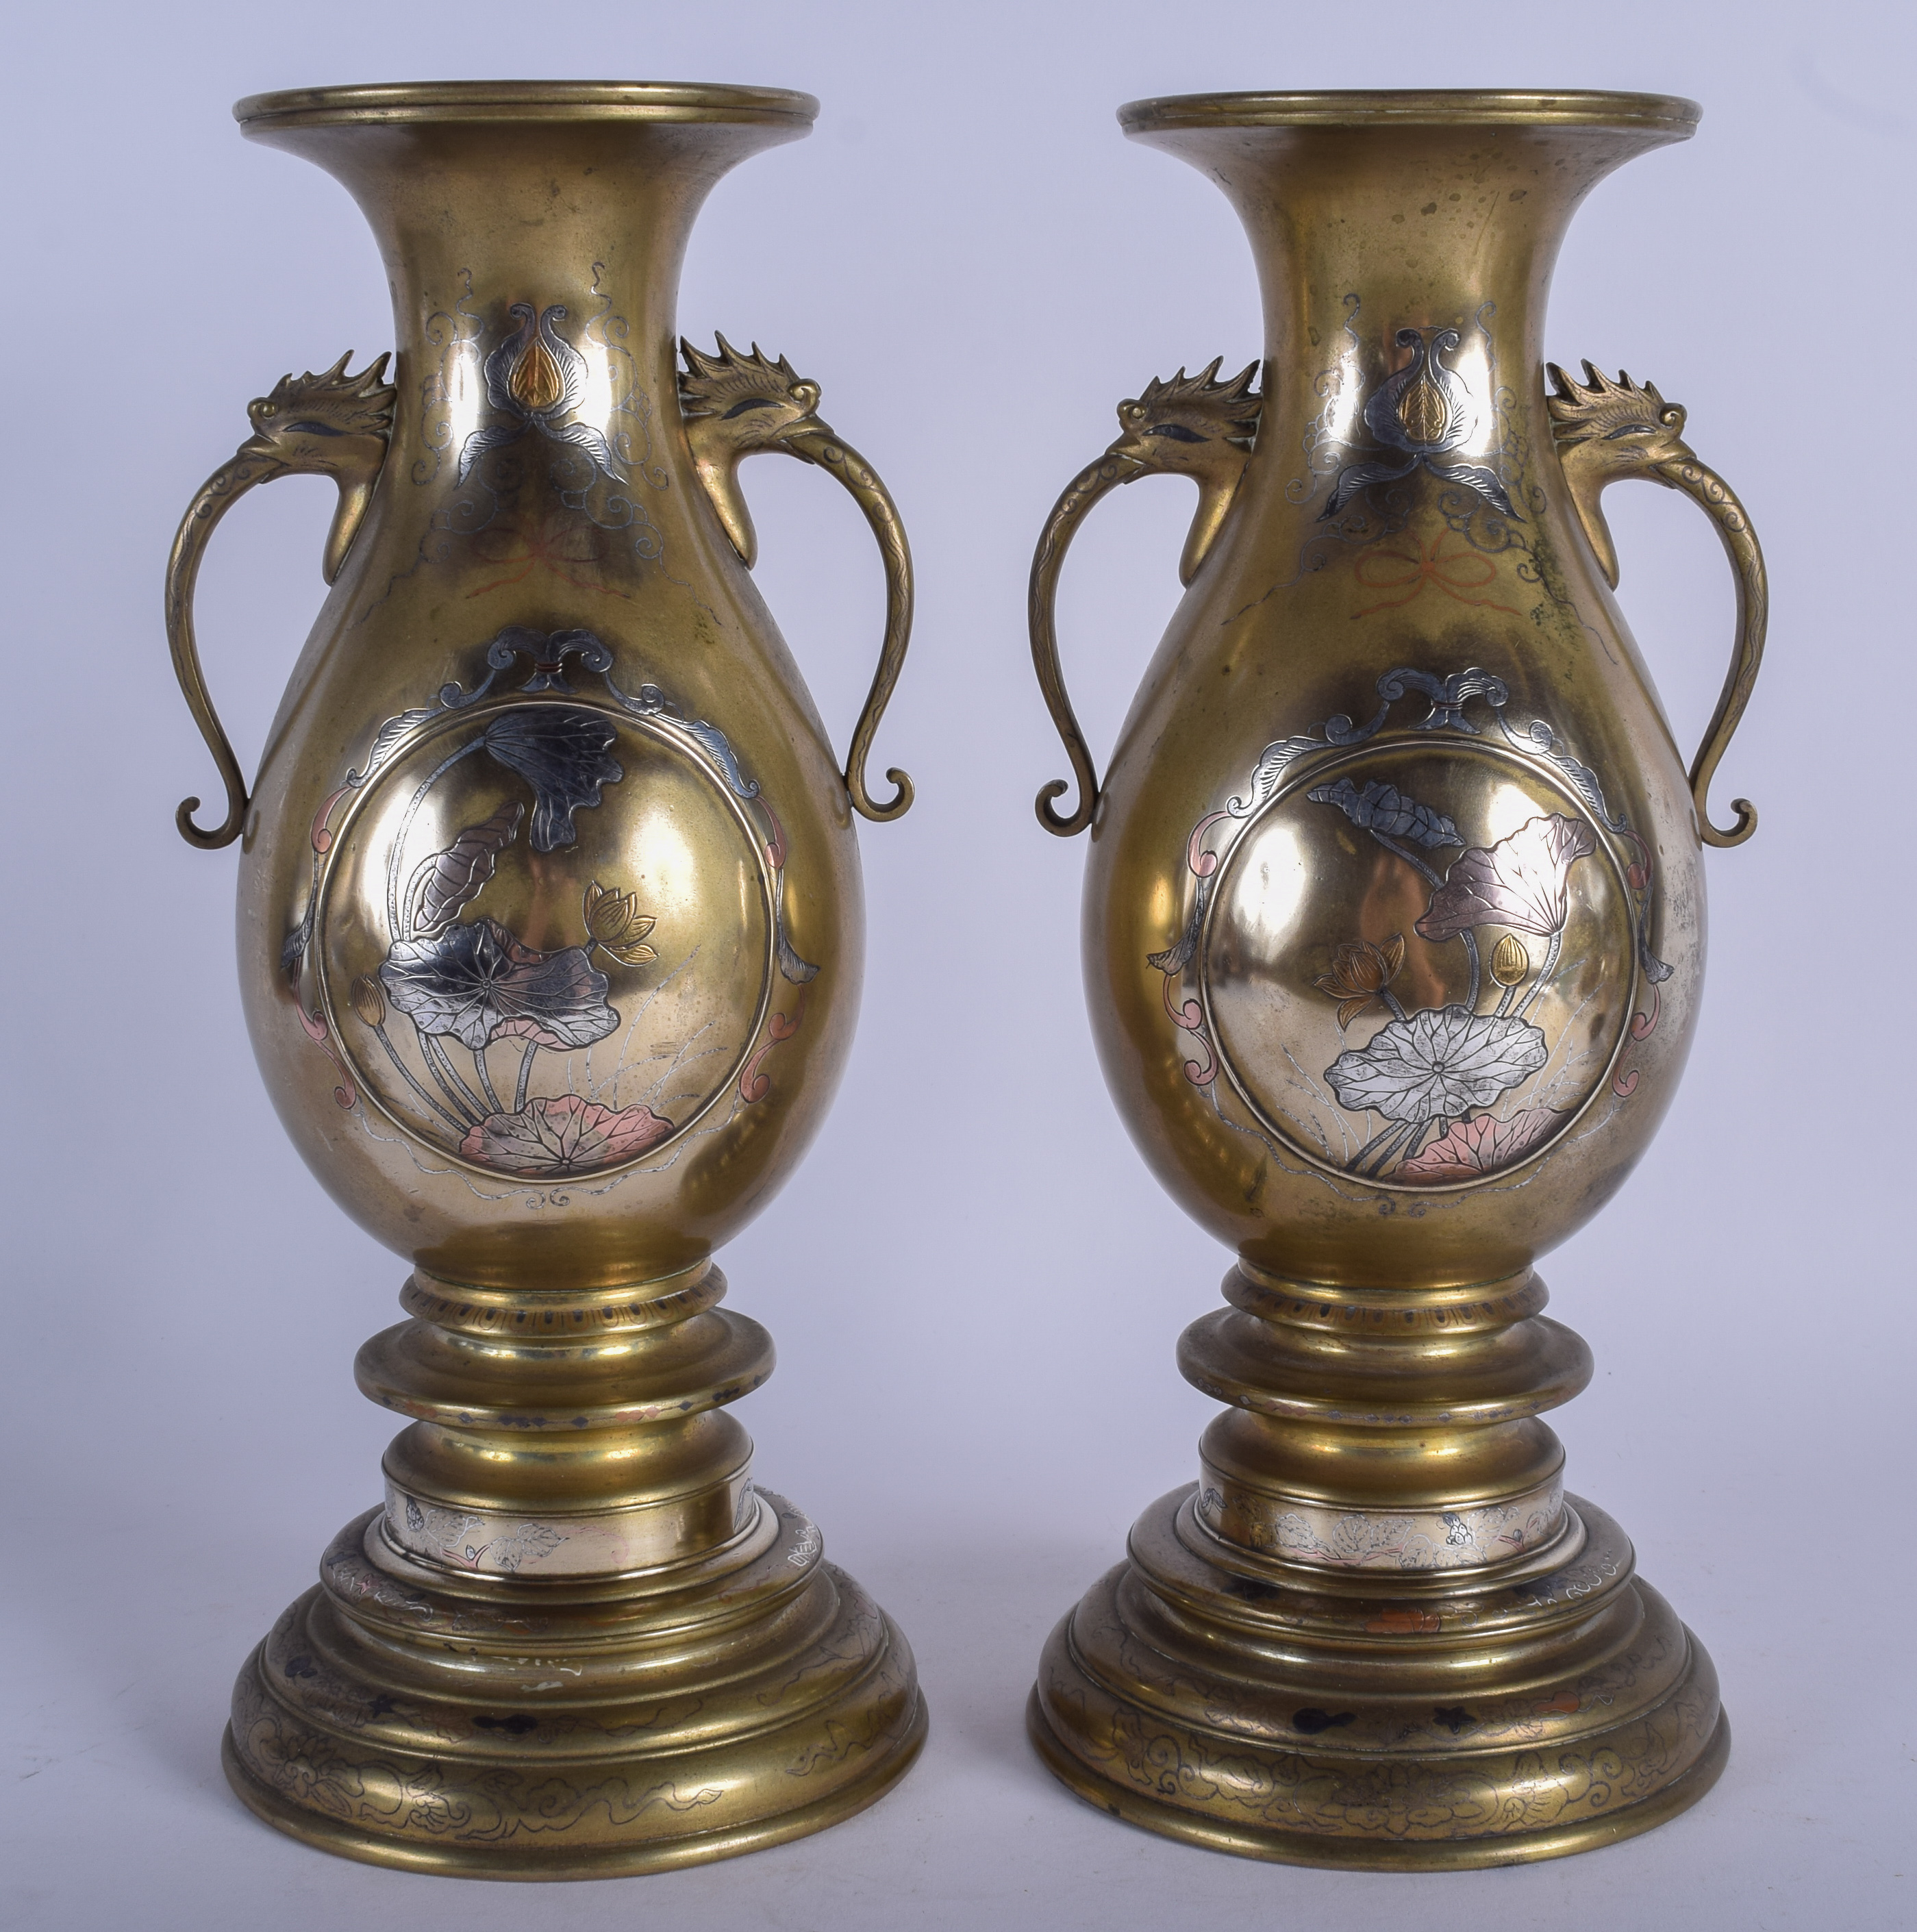 A PAIR OF 19TH CENTURY JAPANESE MEIJI PERIOD TWIN HANDLED BRONZE VASES in the manner of Kanazawa Do - Image 2 of 3